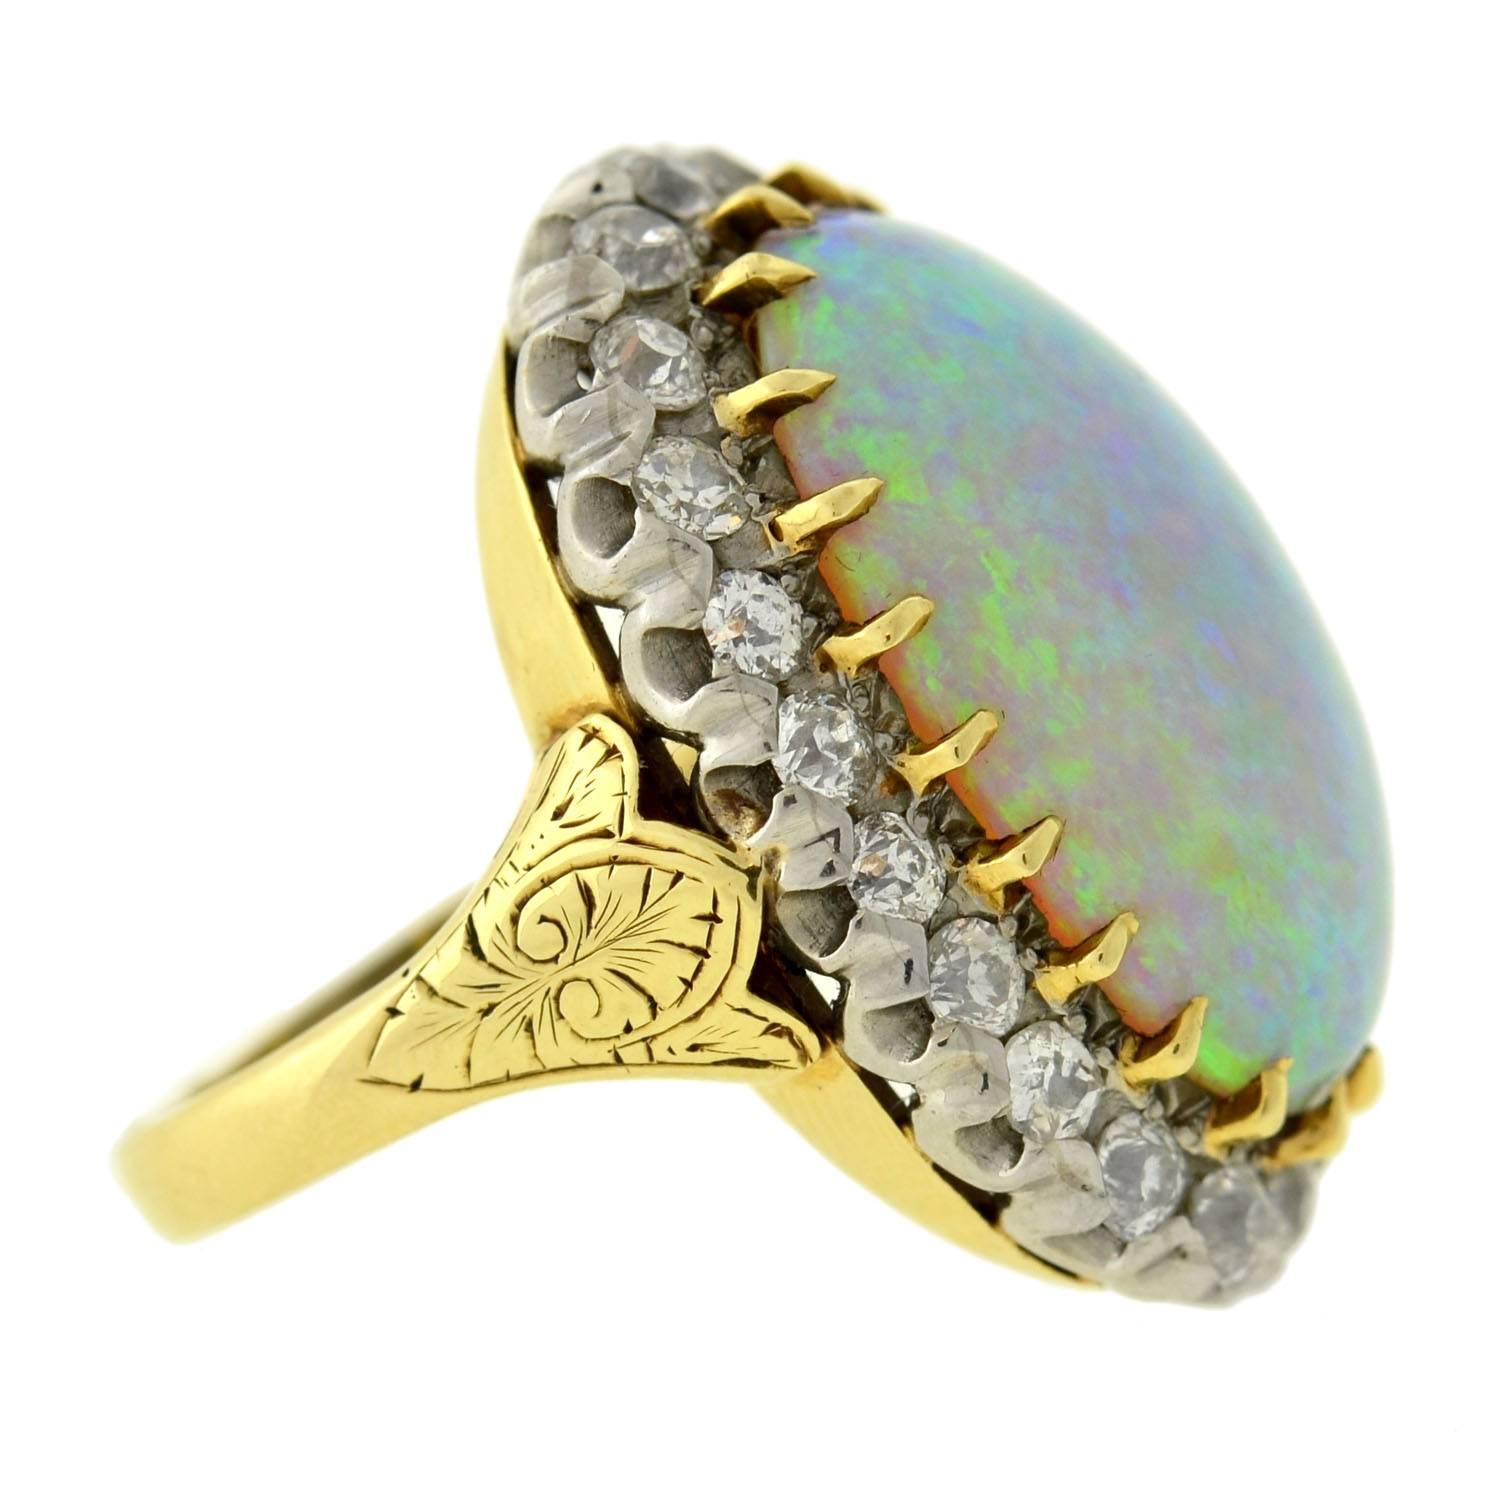 A simply exquisite and unusual opal and diamond ring from the Victorian era! This fabulous ring has a single oval-shaped cabochon opal stone set in its center. The stone, which is particularly large in size, is prong set in yellow gold and has